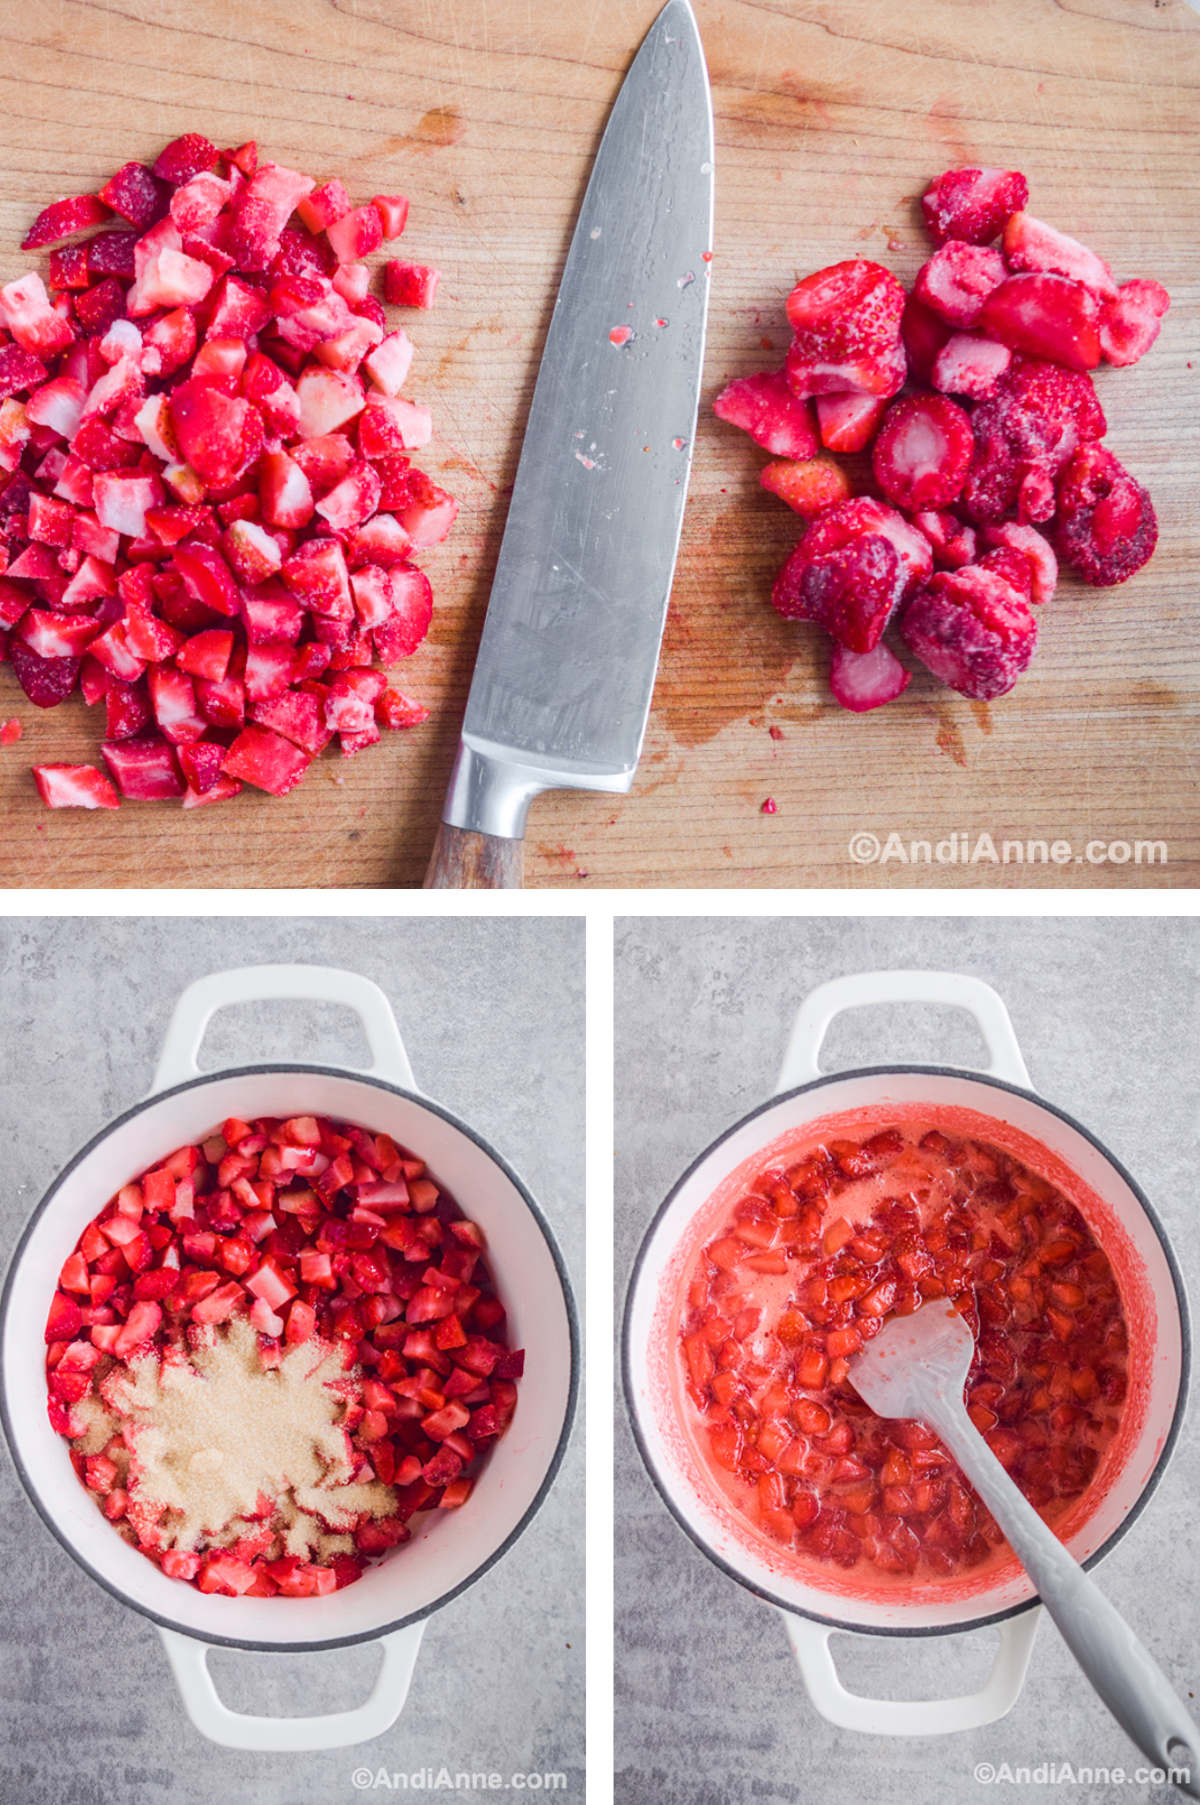 Three overhead images in one: 1. Chopped strawberries on a cutting board next to a chef's knife. 2. Chopped strawberries in a white pot with sugar. 3. Chopped strawberries in pot with lemon juice, water and sugar. 